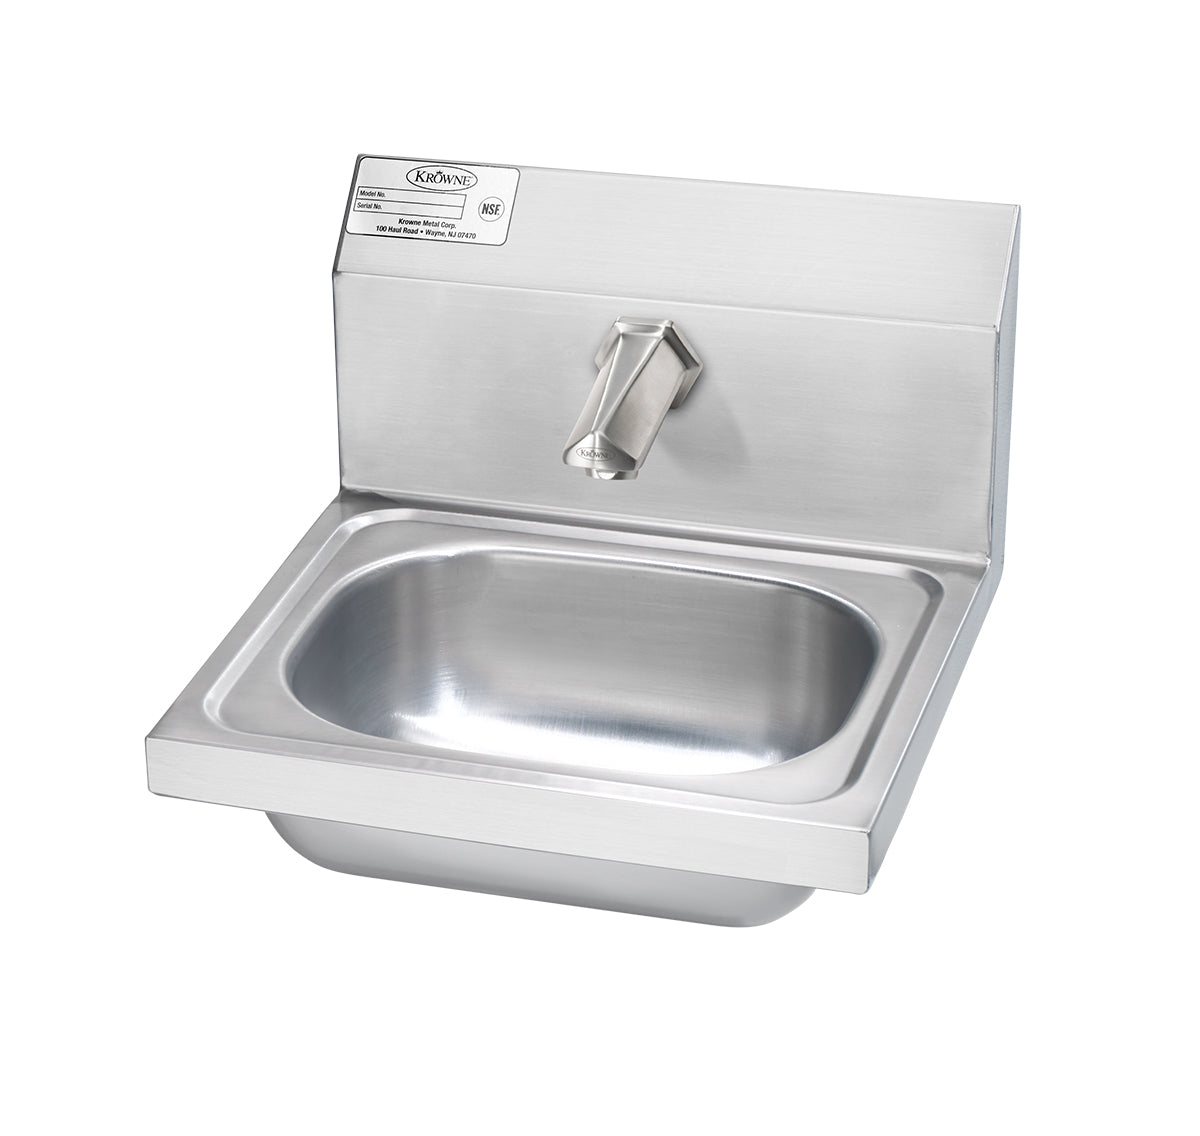 Krowne HS-69. Hand Sink with Single Hole Electronic Sensor Faucet, 16"W.